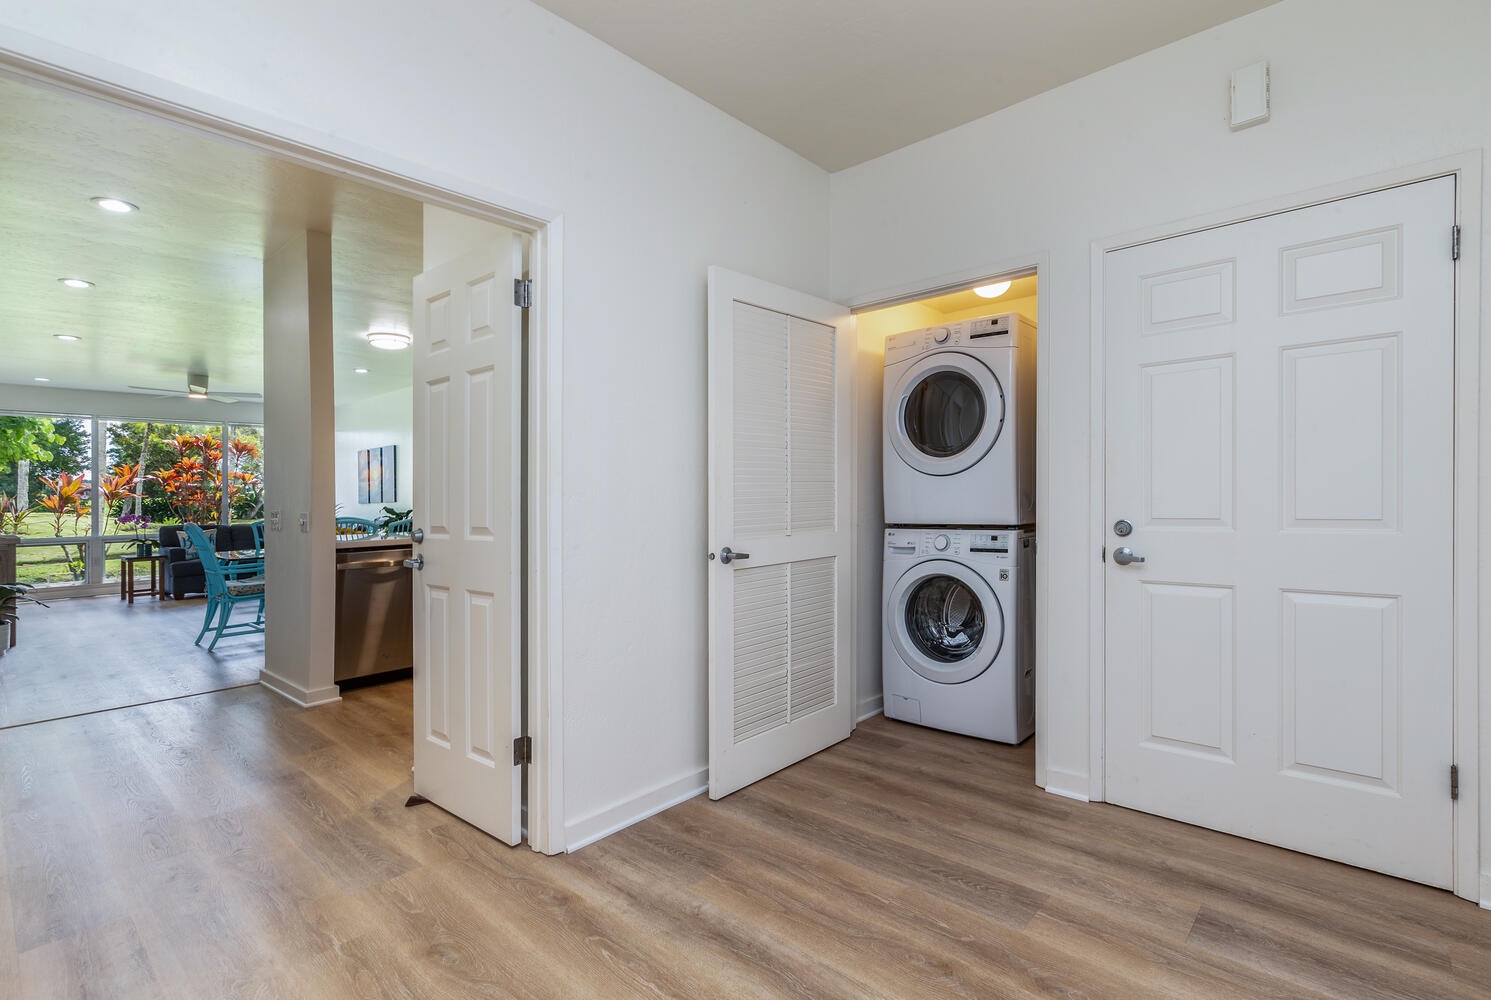 Princeville Vacation Rentals, Emmalani Court 414 - In-house laundry with brand new high-performance washer and dryer